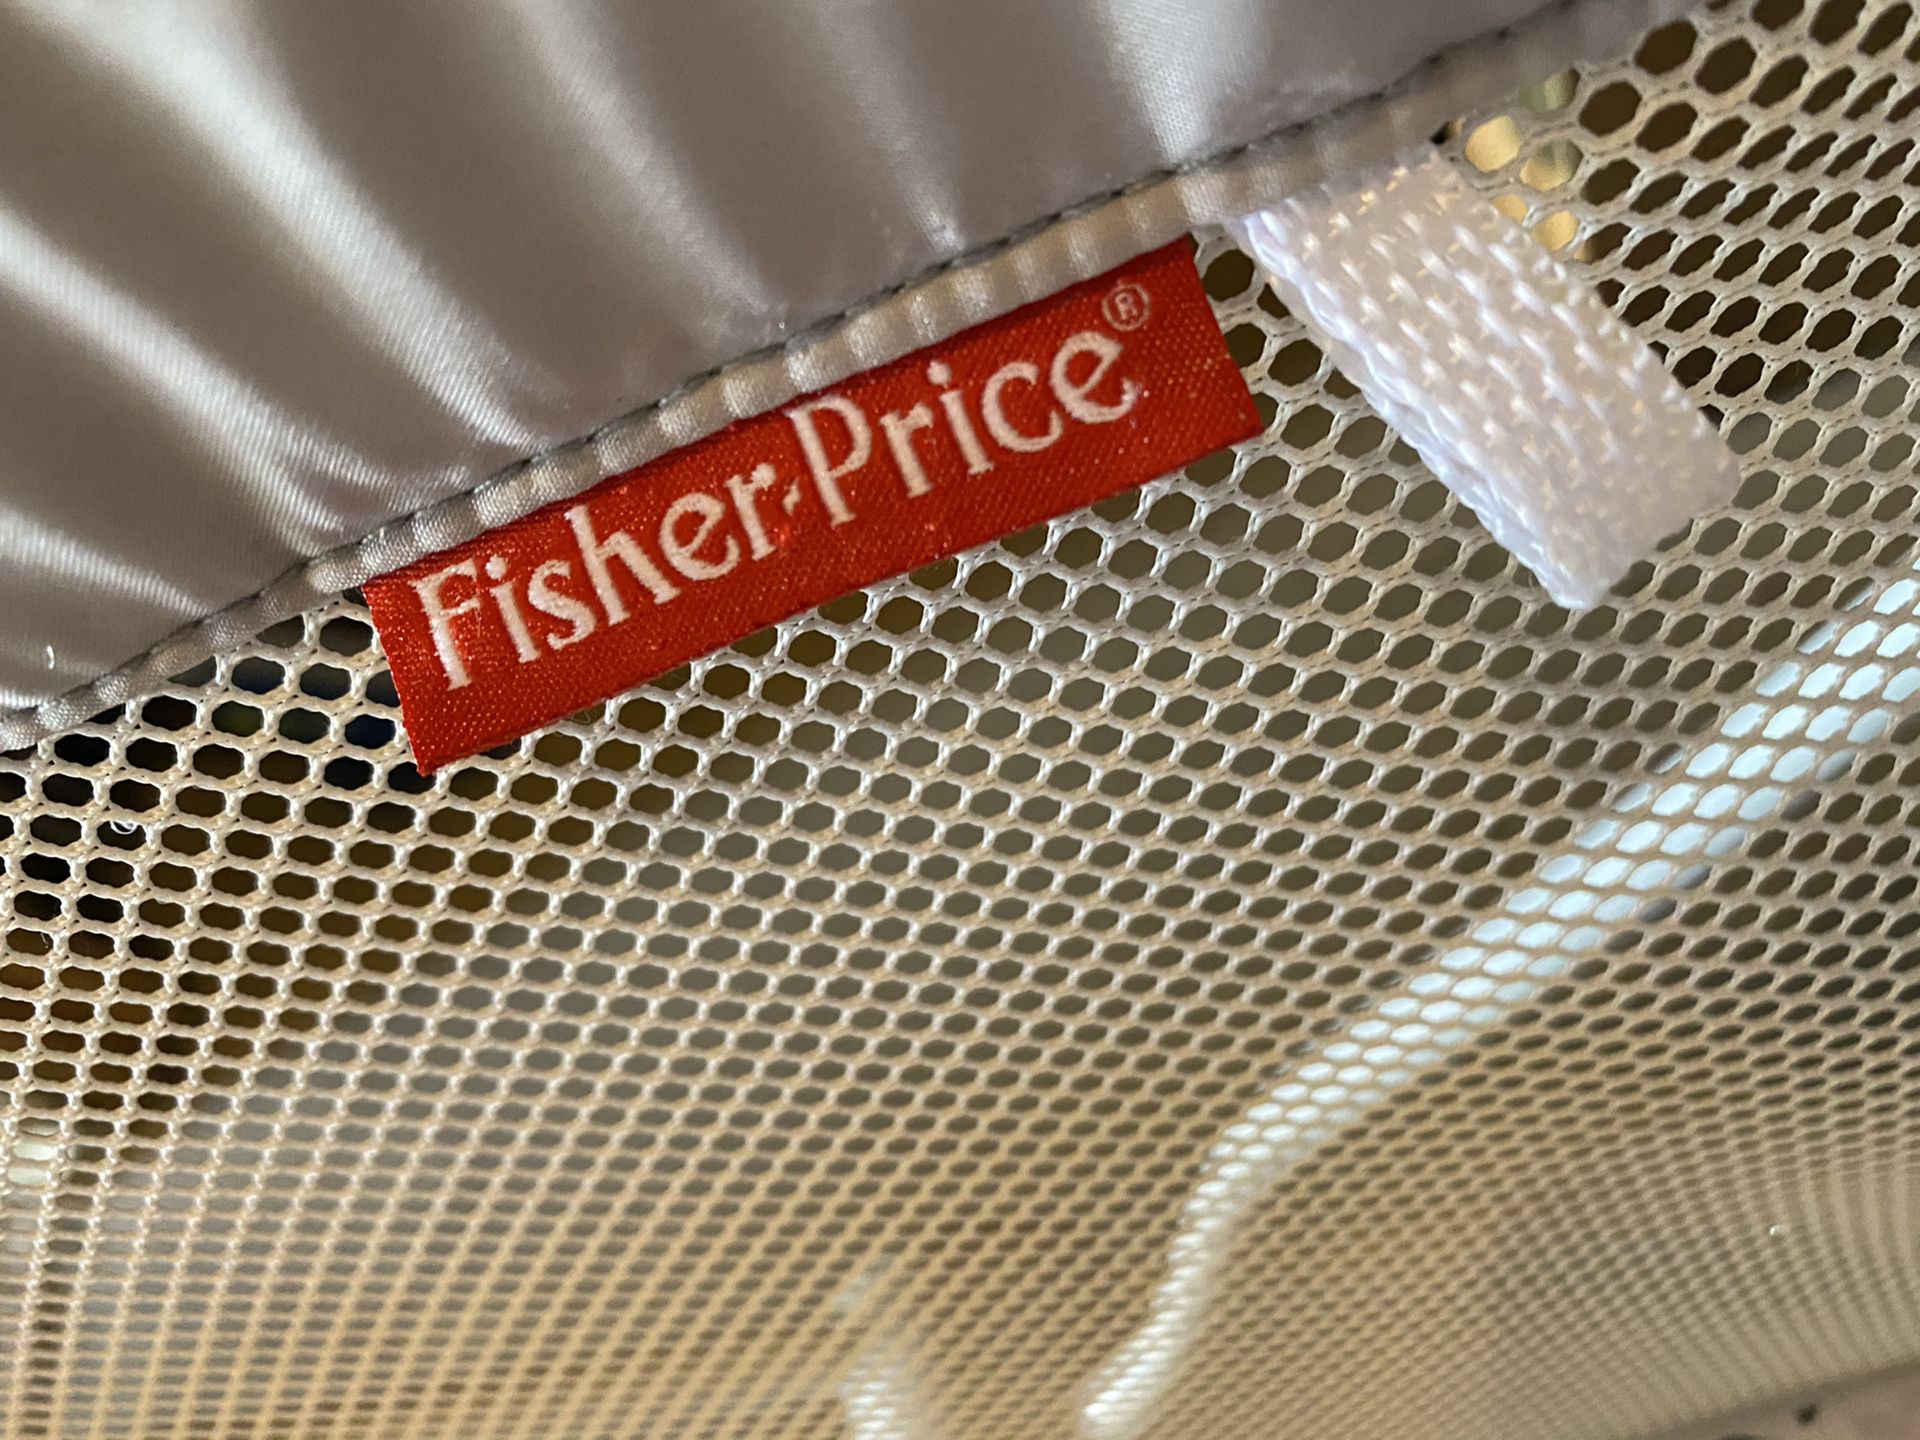 Portable fisher price bassinet